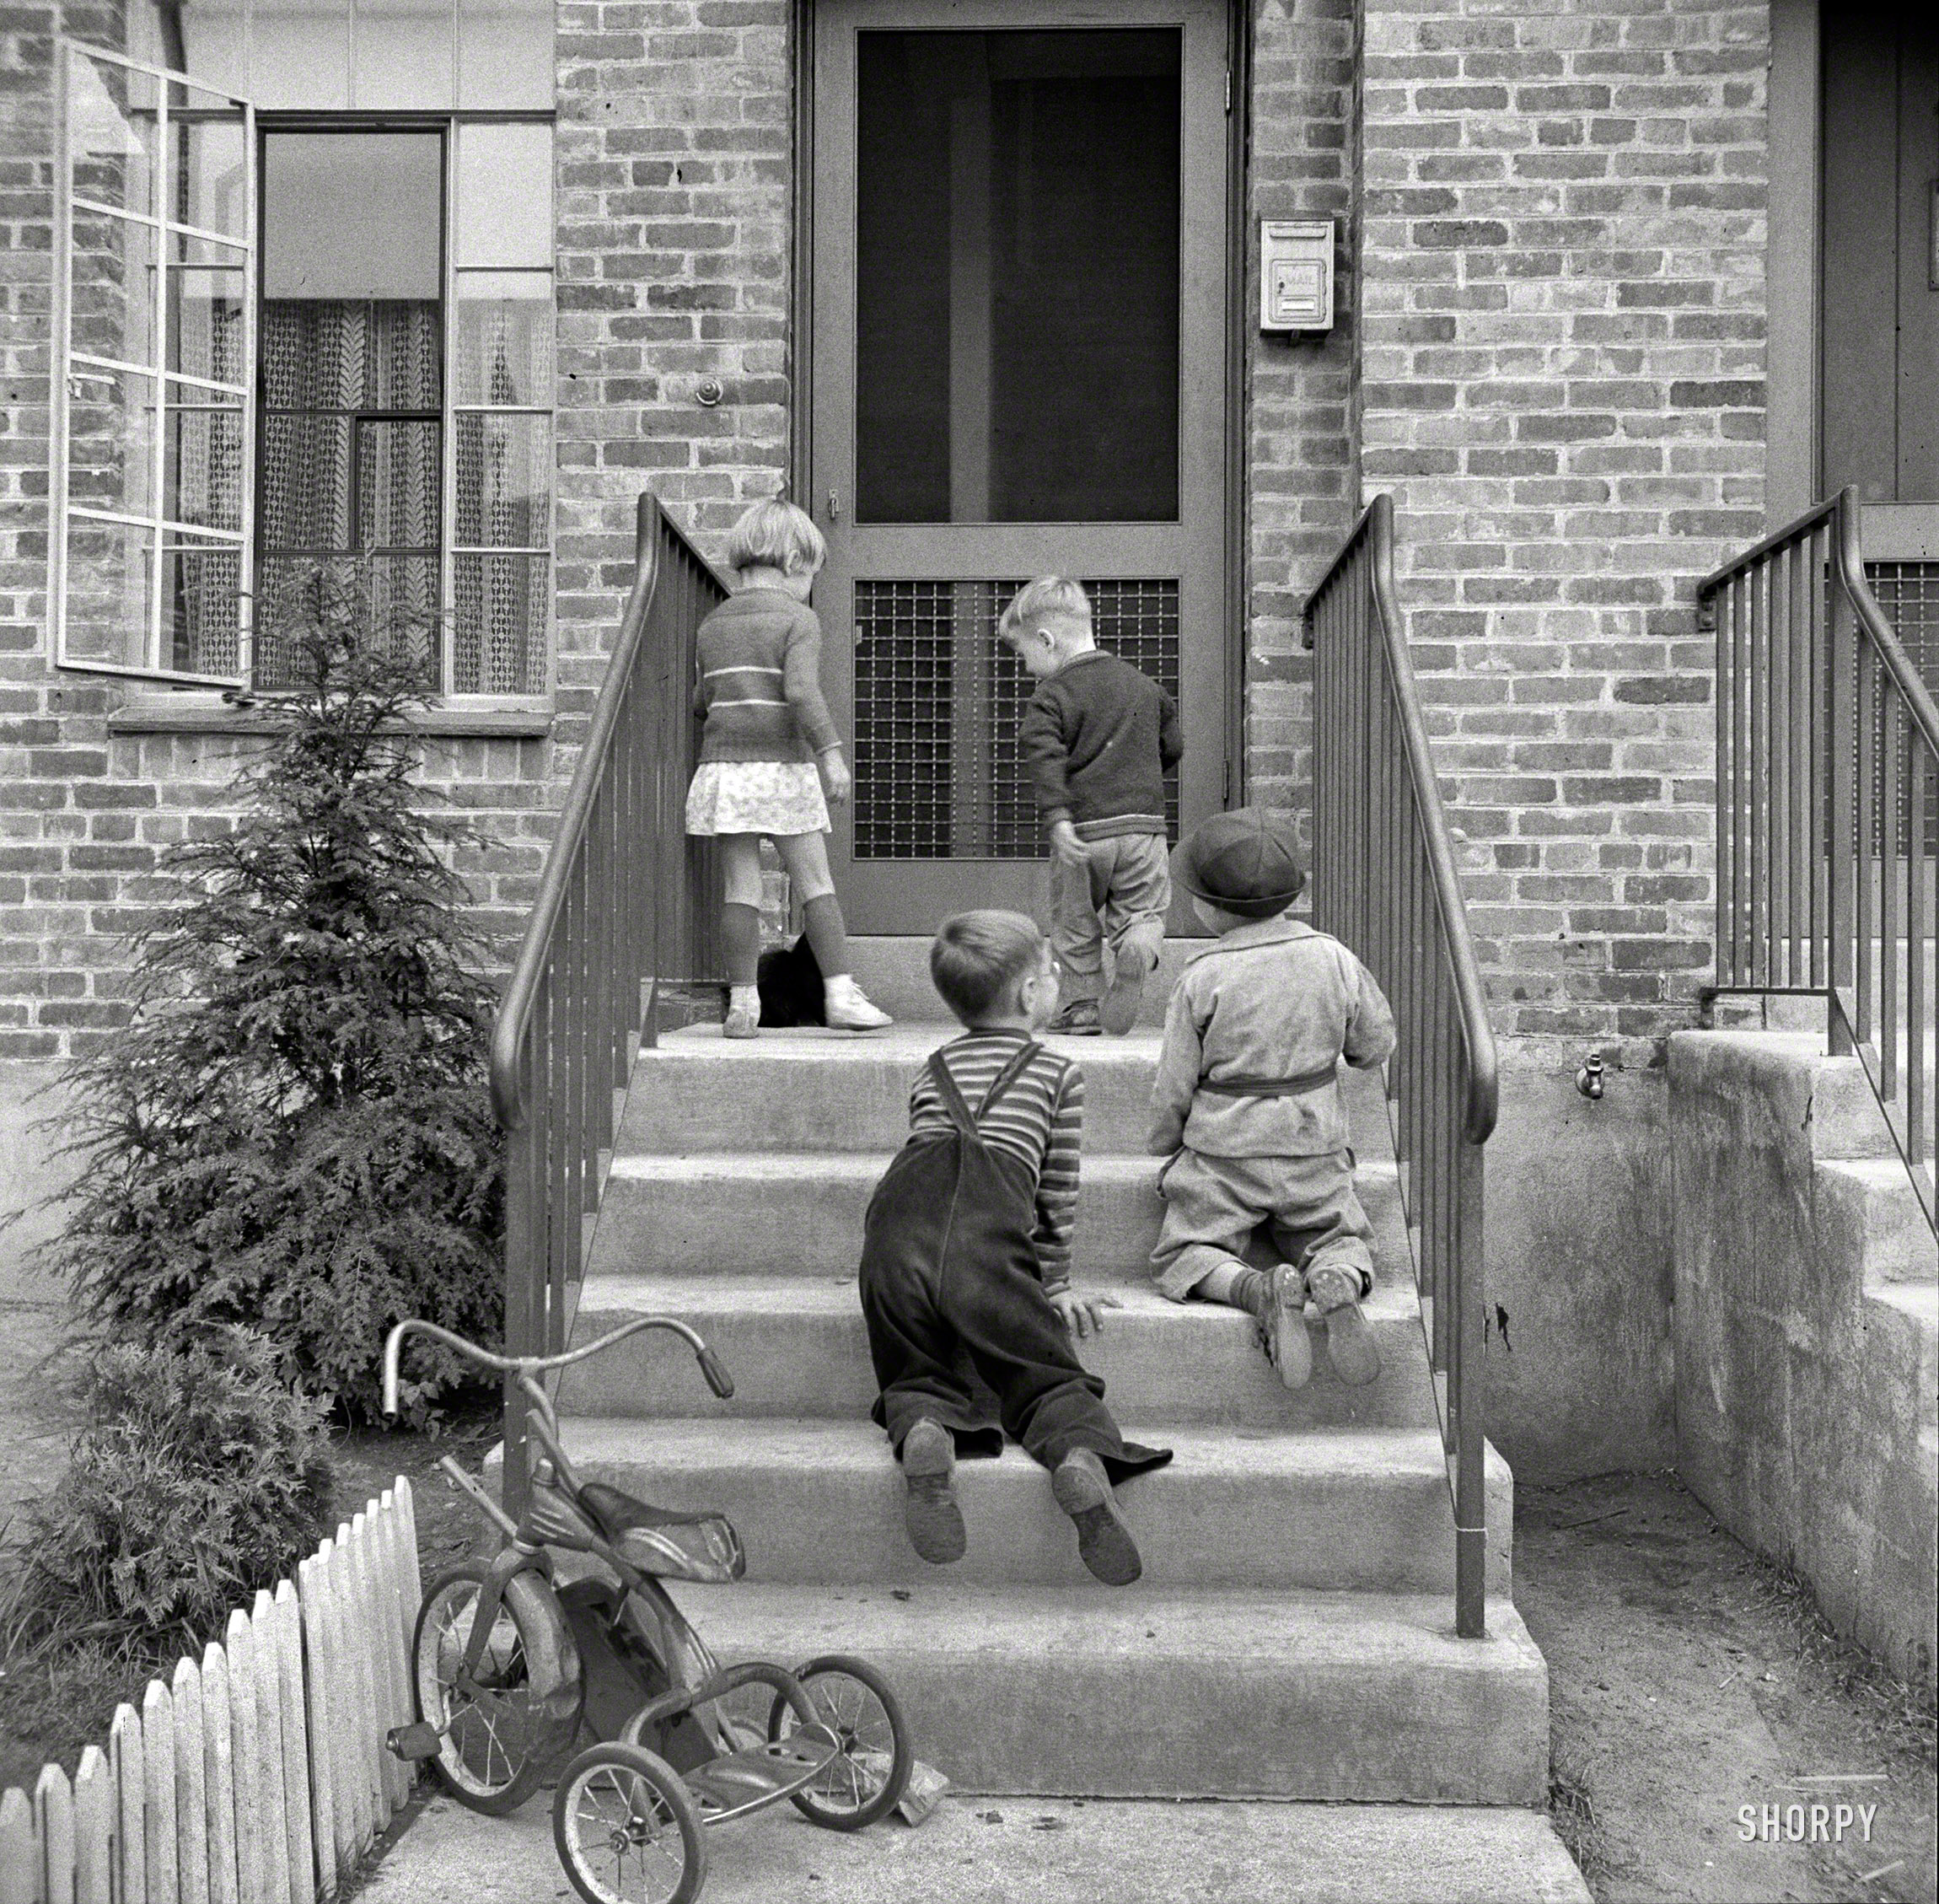 September 1941. "Children play in safety in the Federal Housing Administration low-income housing project at Holyoke, Massachusetts." Photo by John Collier for the Resettlement Administration. View full size.